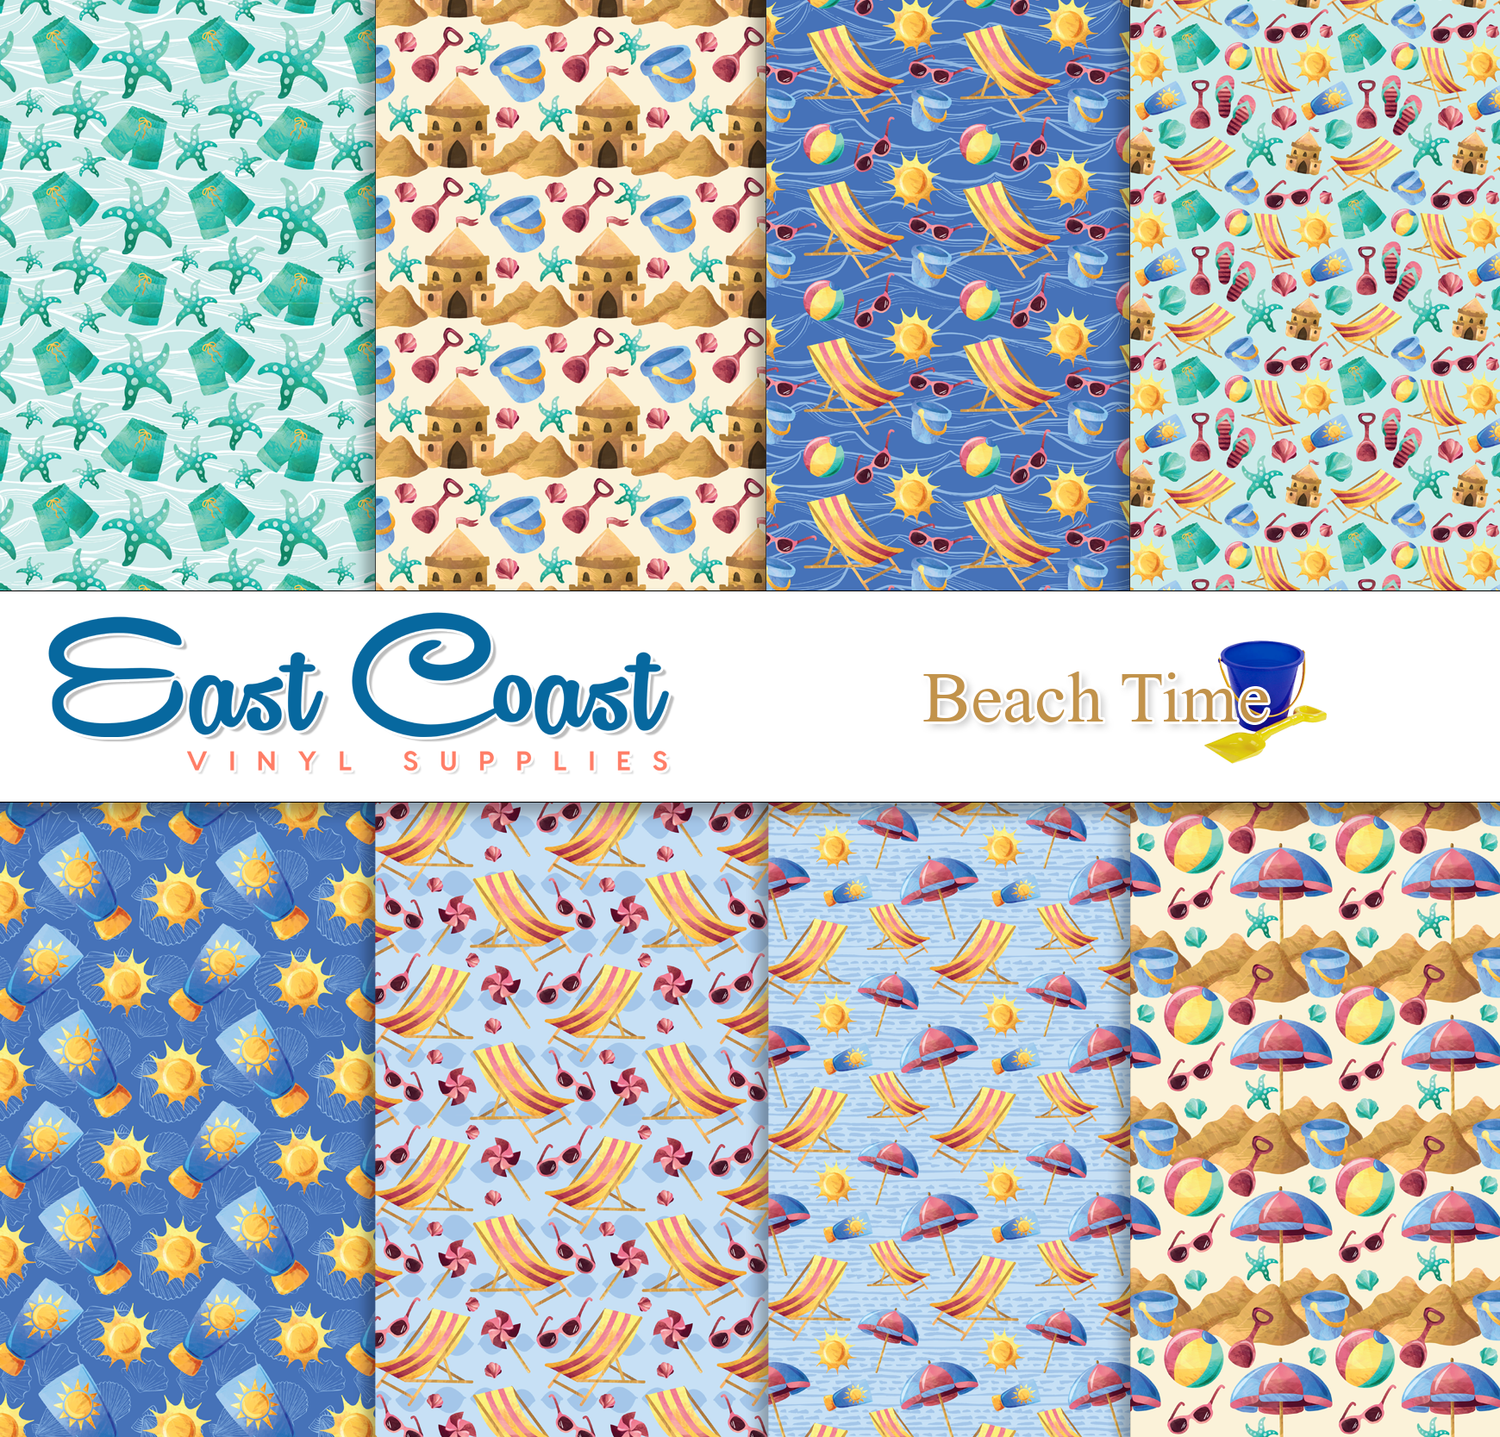 Seas the Day Oracal 631 (Removable) Crafting Bundle! – East Coast Vinyl  Supplies